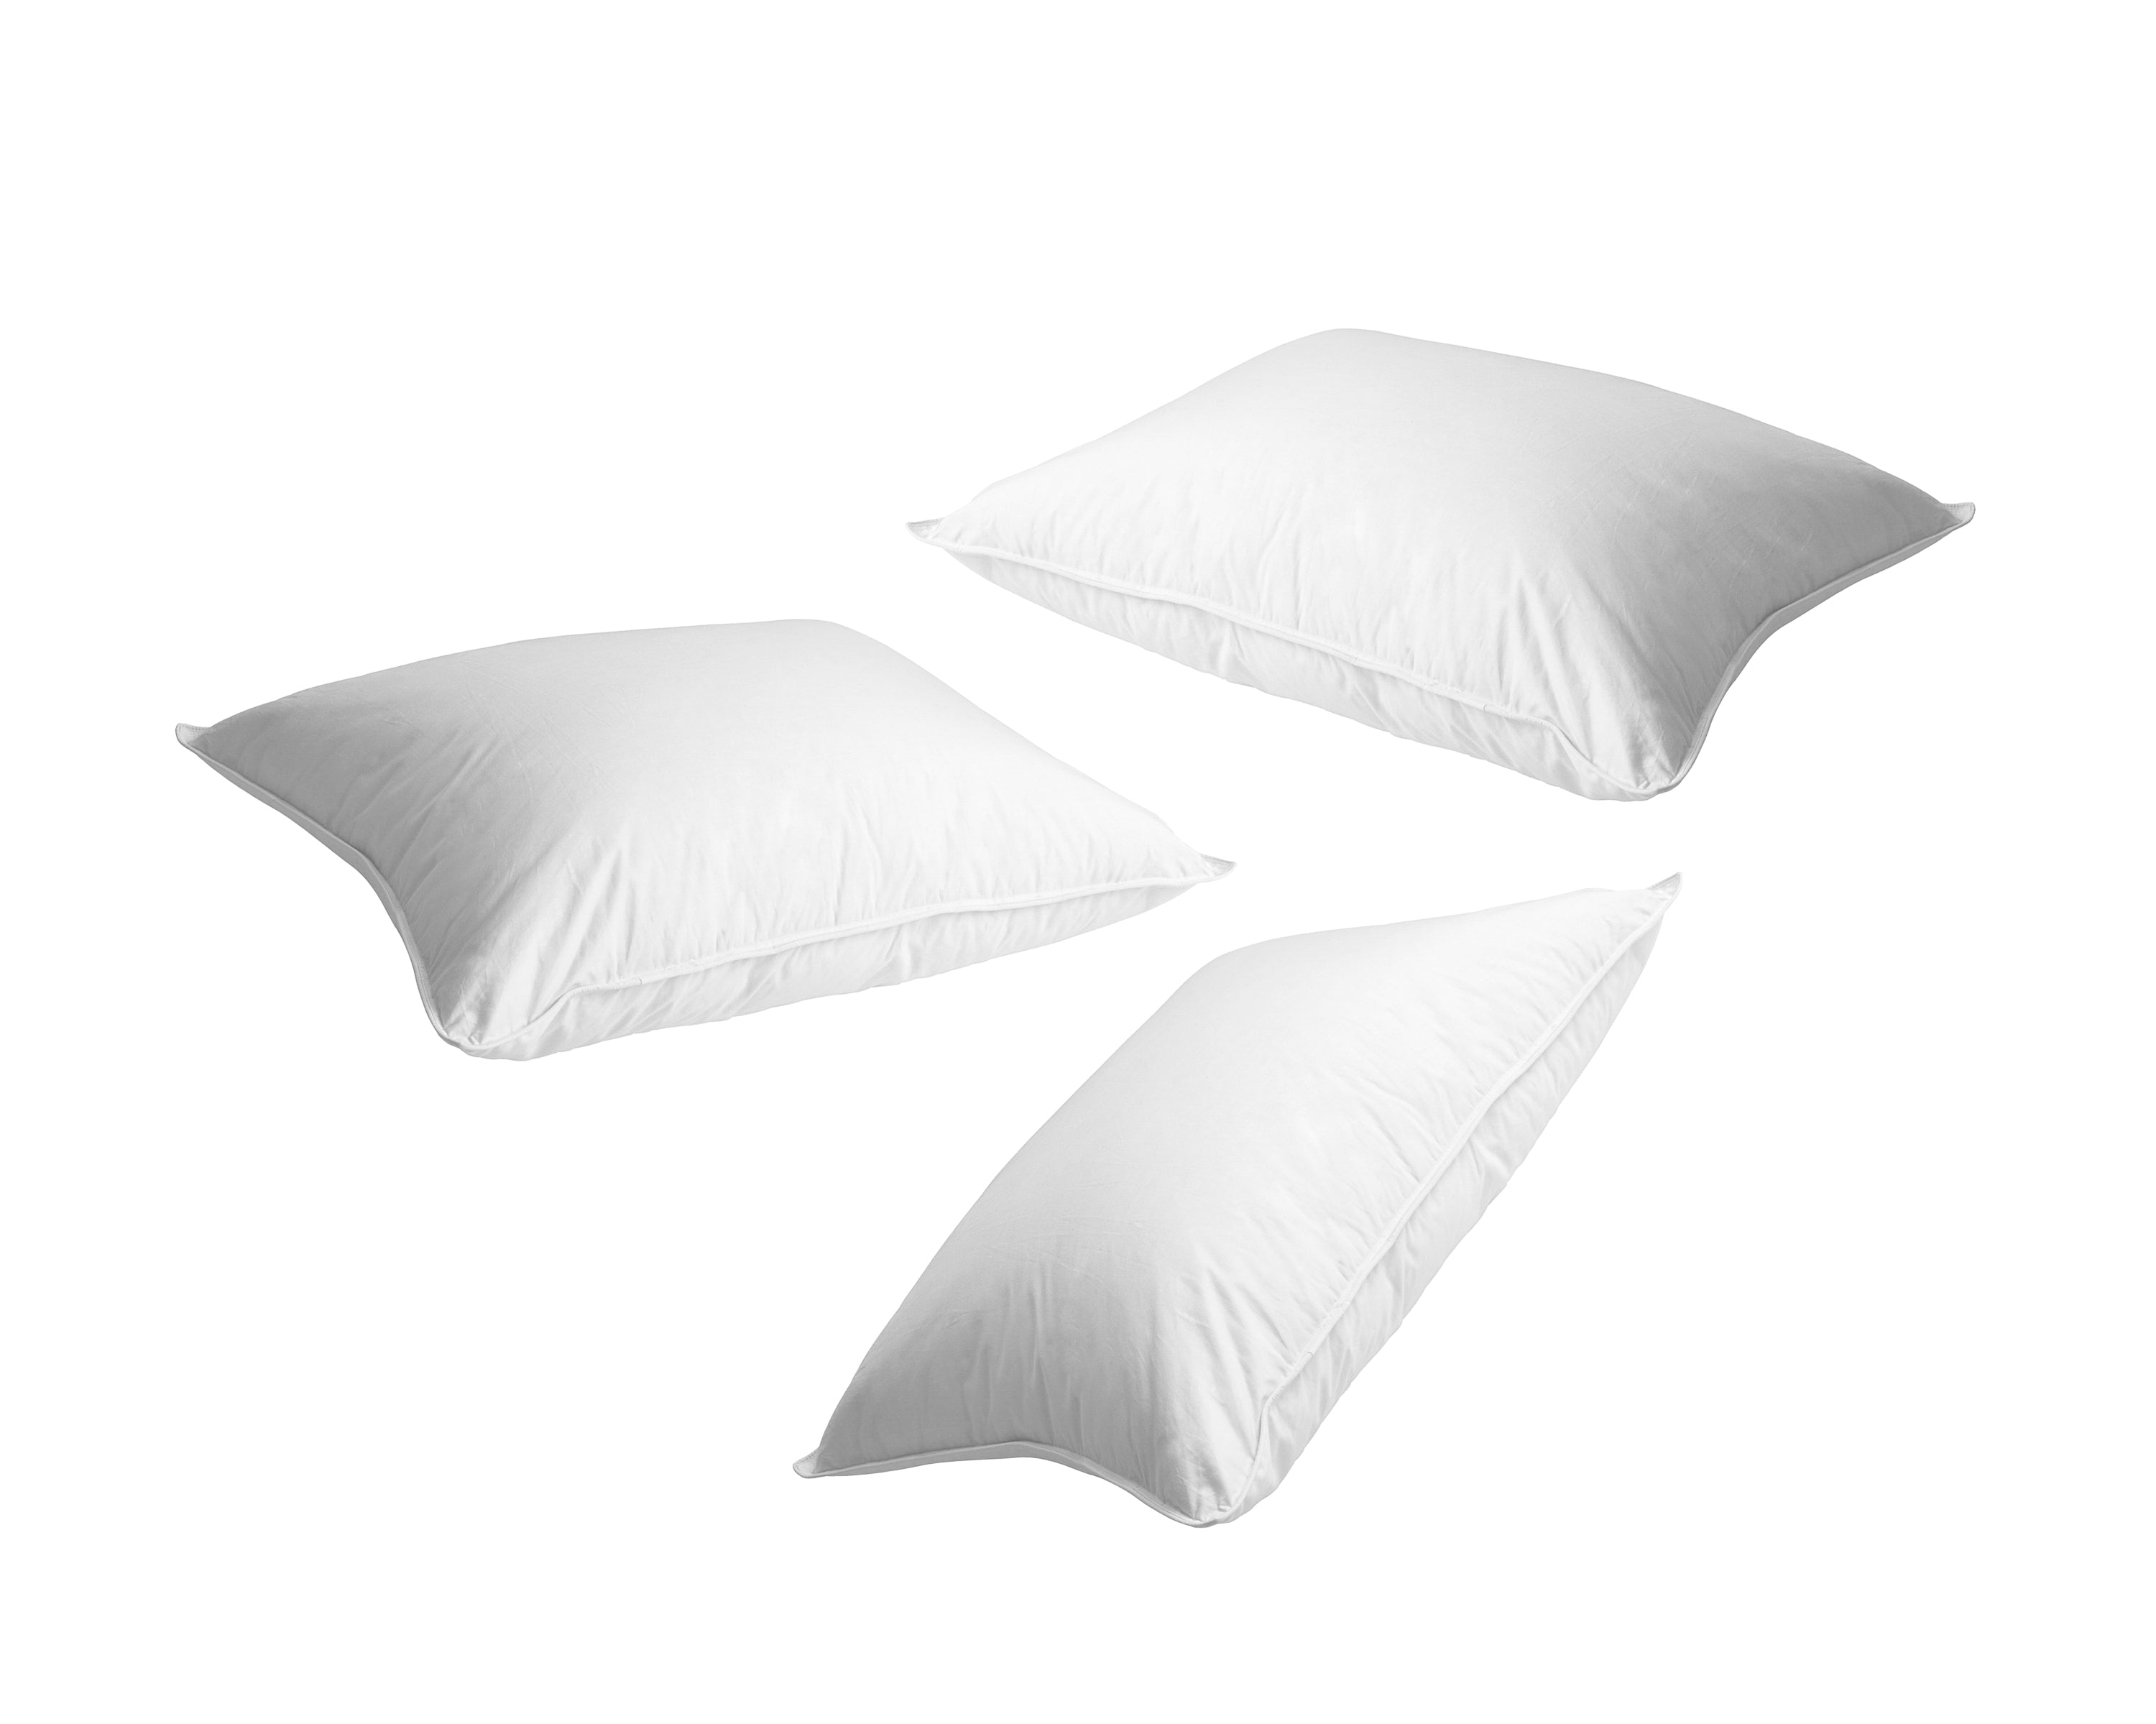 Organic Latex & Cotton Pillows, For Support & Comfort